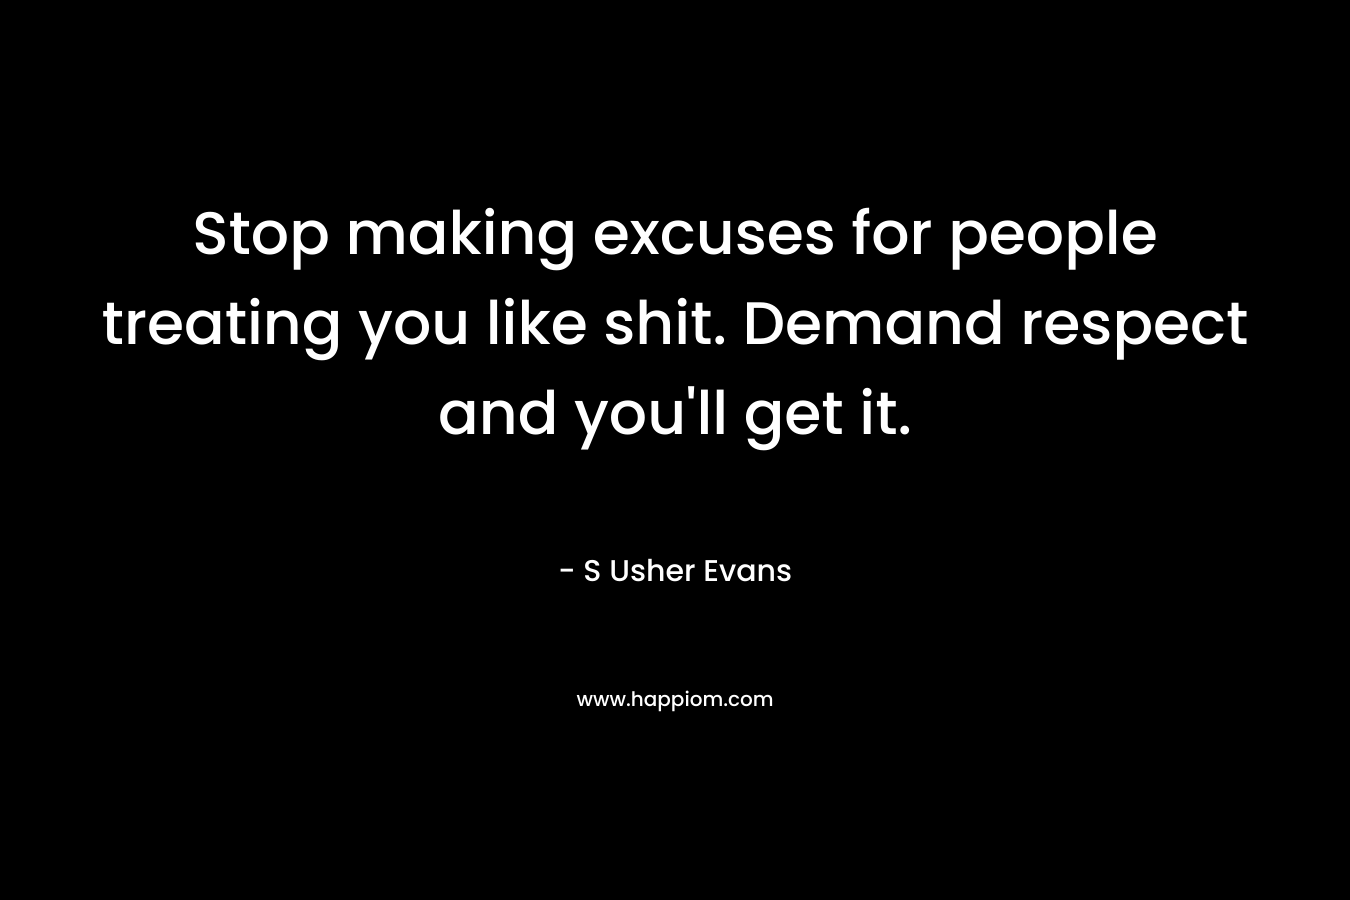 Stop making excuses for people treating you like shit. Demand respect and you'll get it.